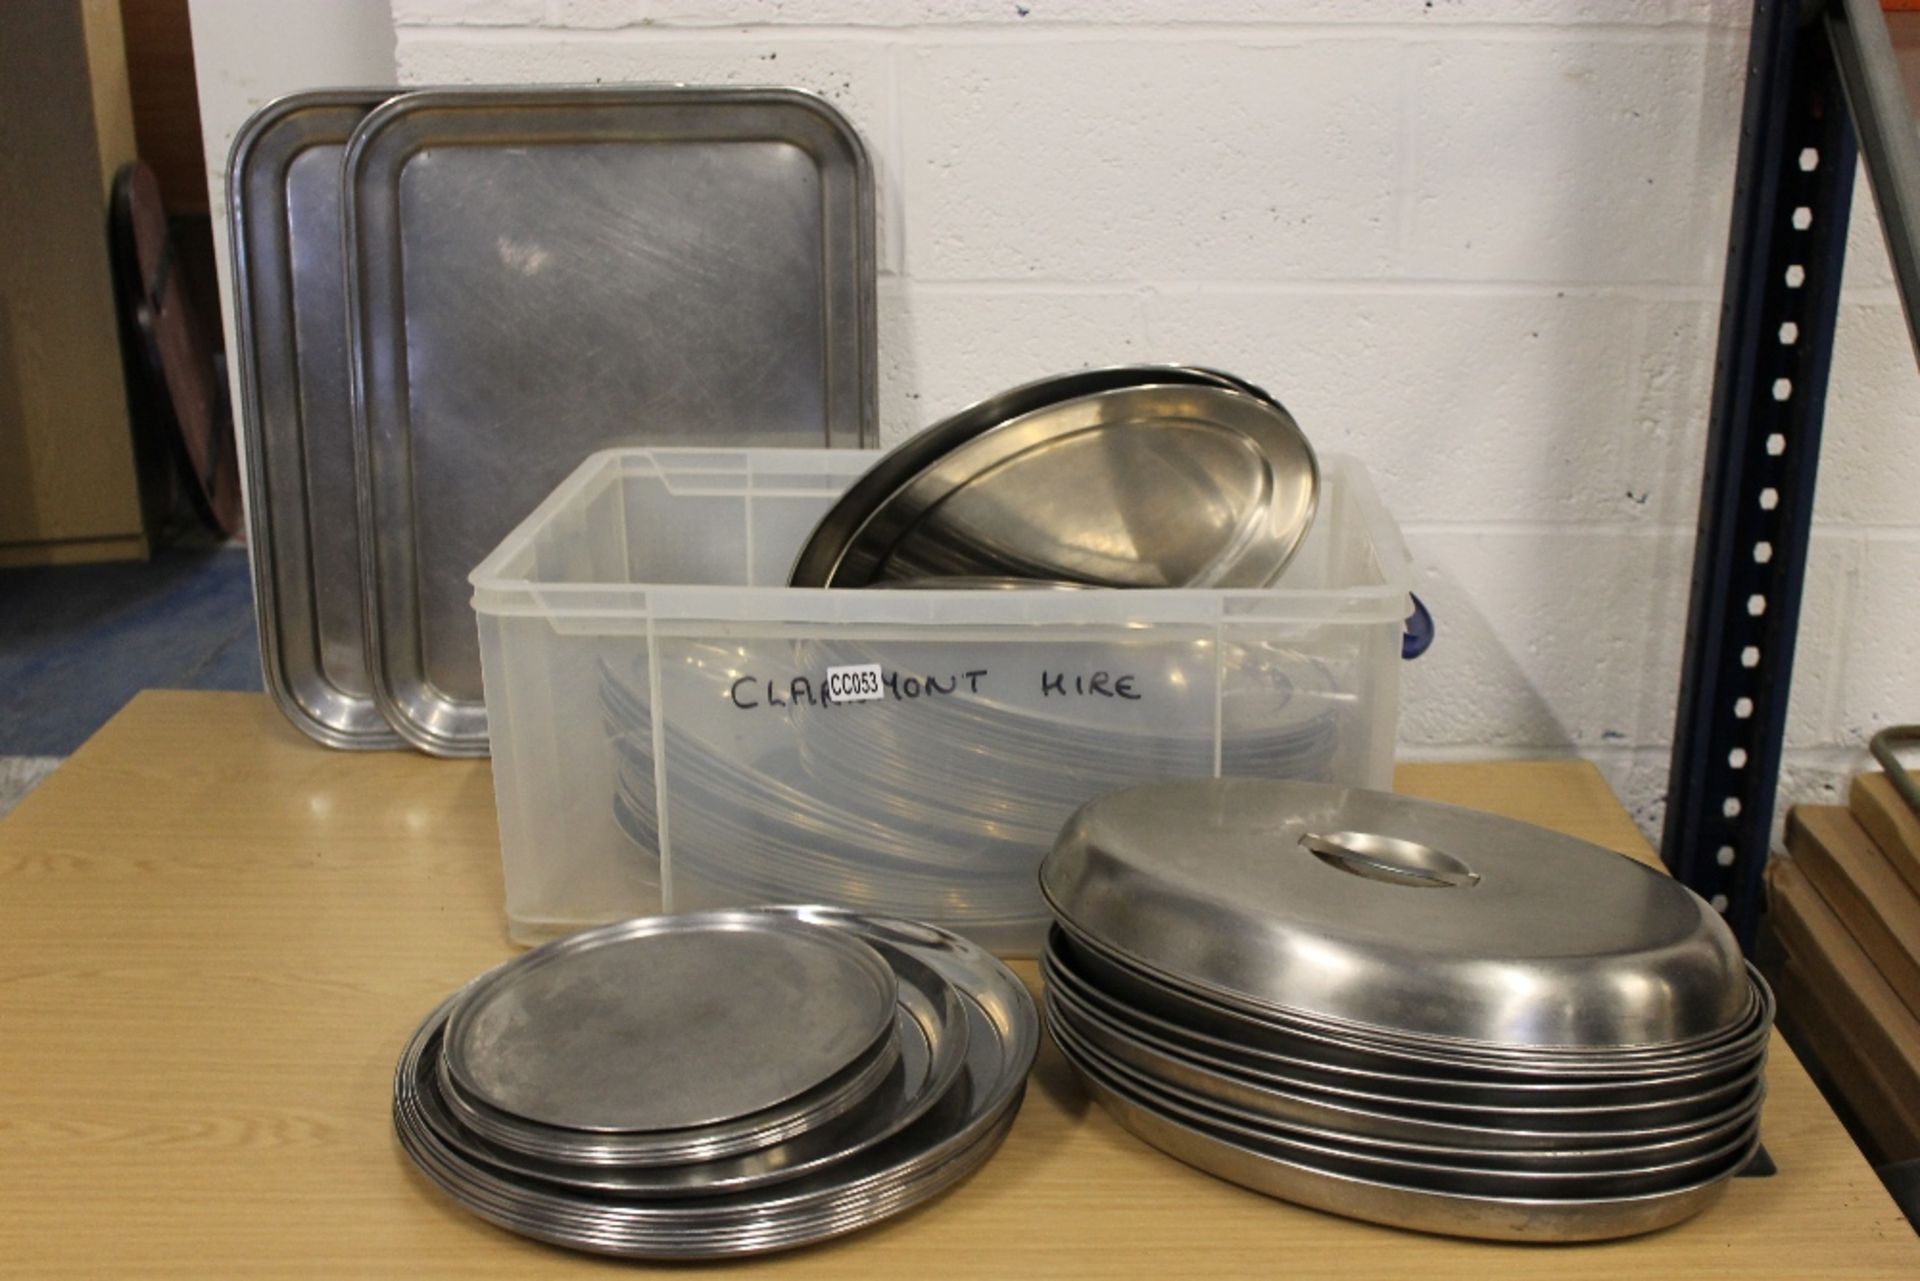 Crate of Stainless Steel Vegetable Servers + Lids – number of Service Trays